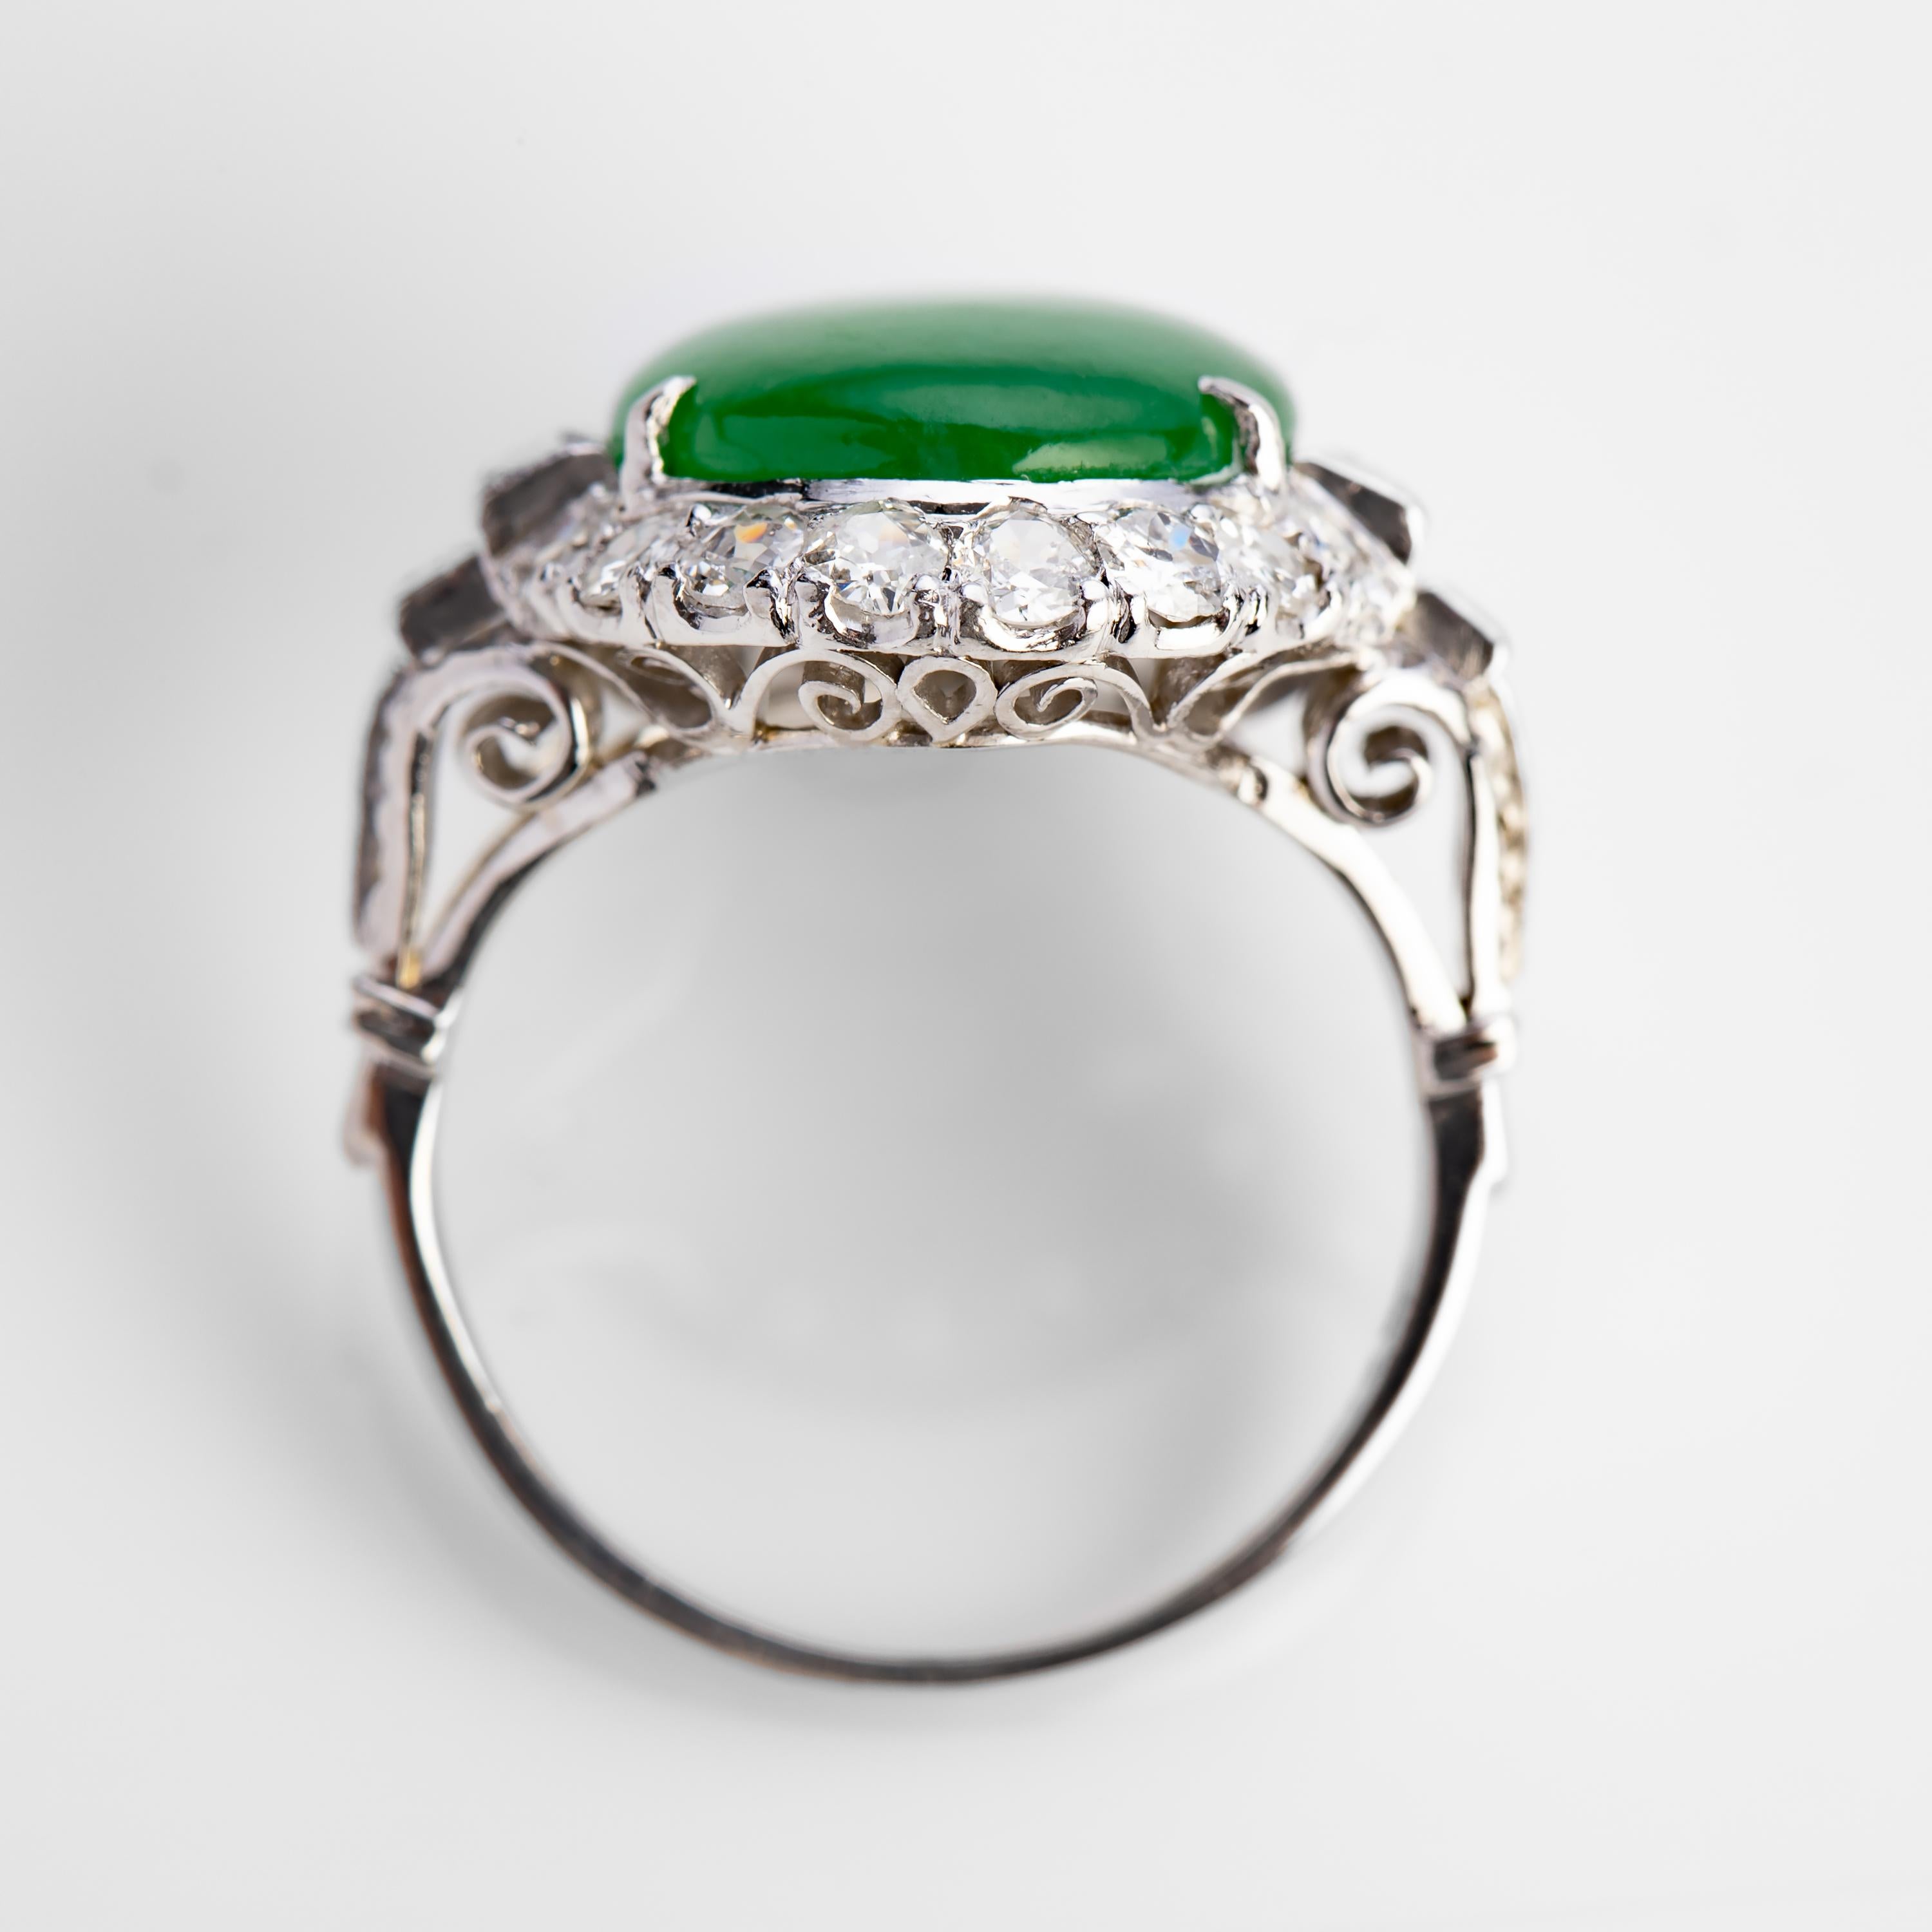 Imperial Jade Ring GIA Certified Untreated, circa 1950 1